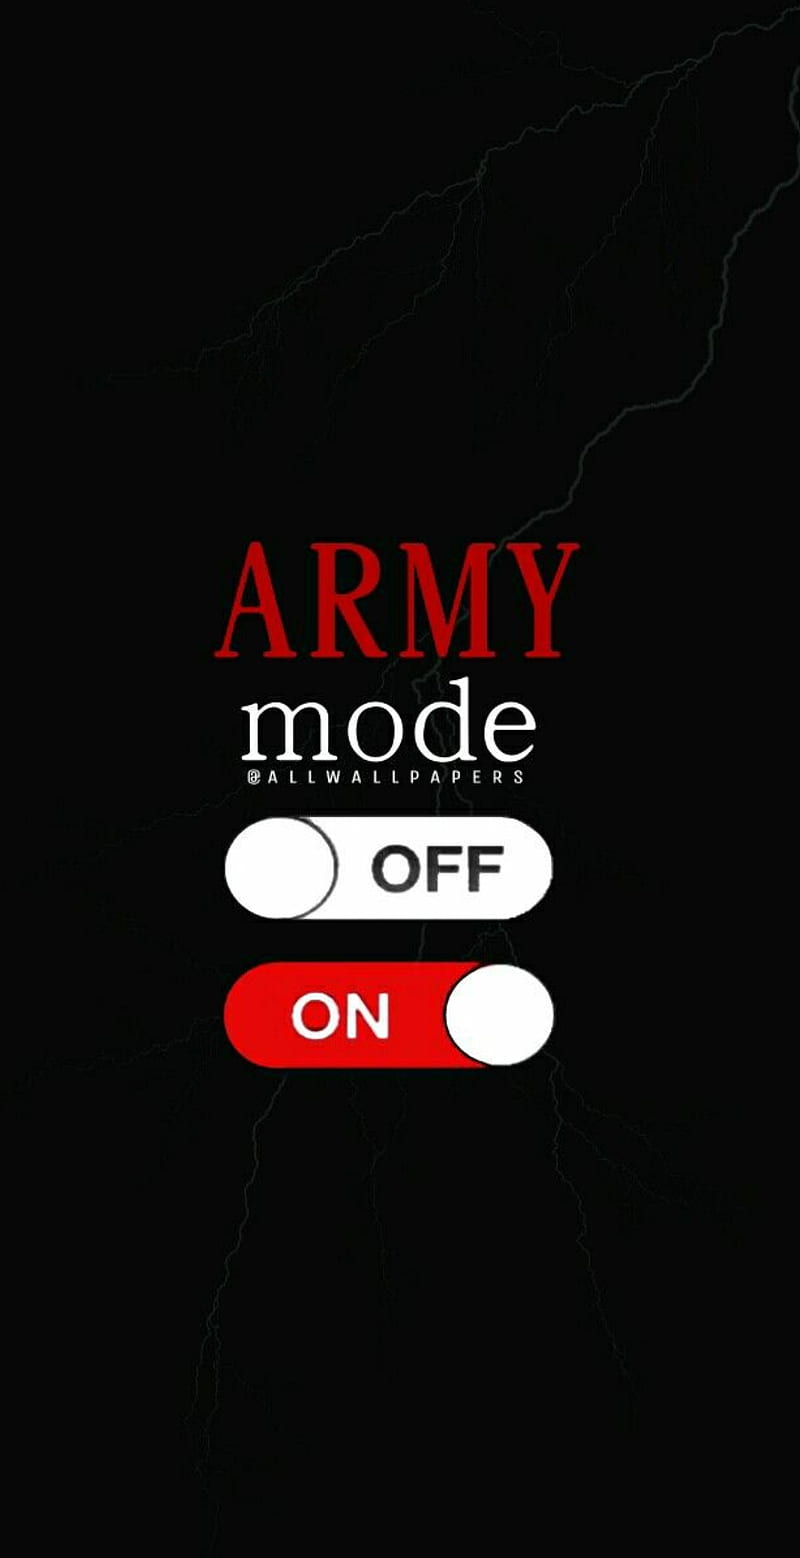 BTS ARMY wallpaper by Btsbangtanboys  Download on ZEDGE  a76e